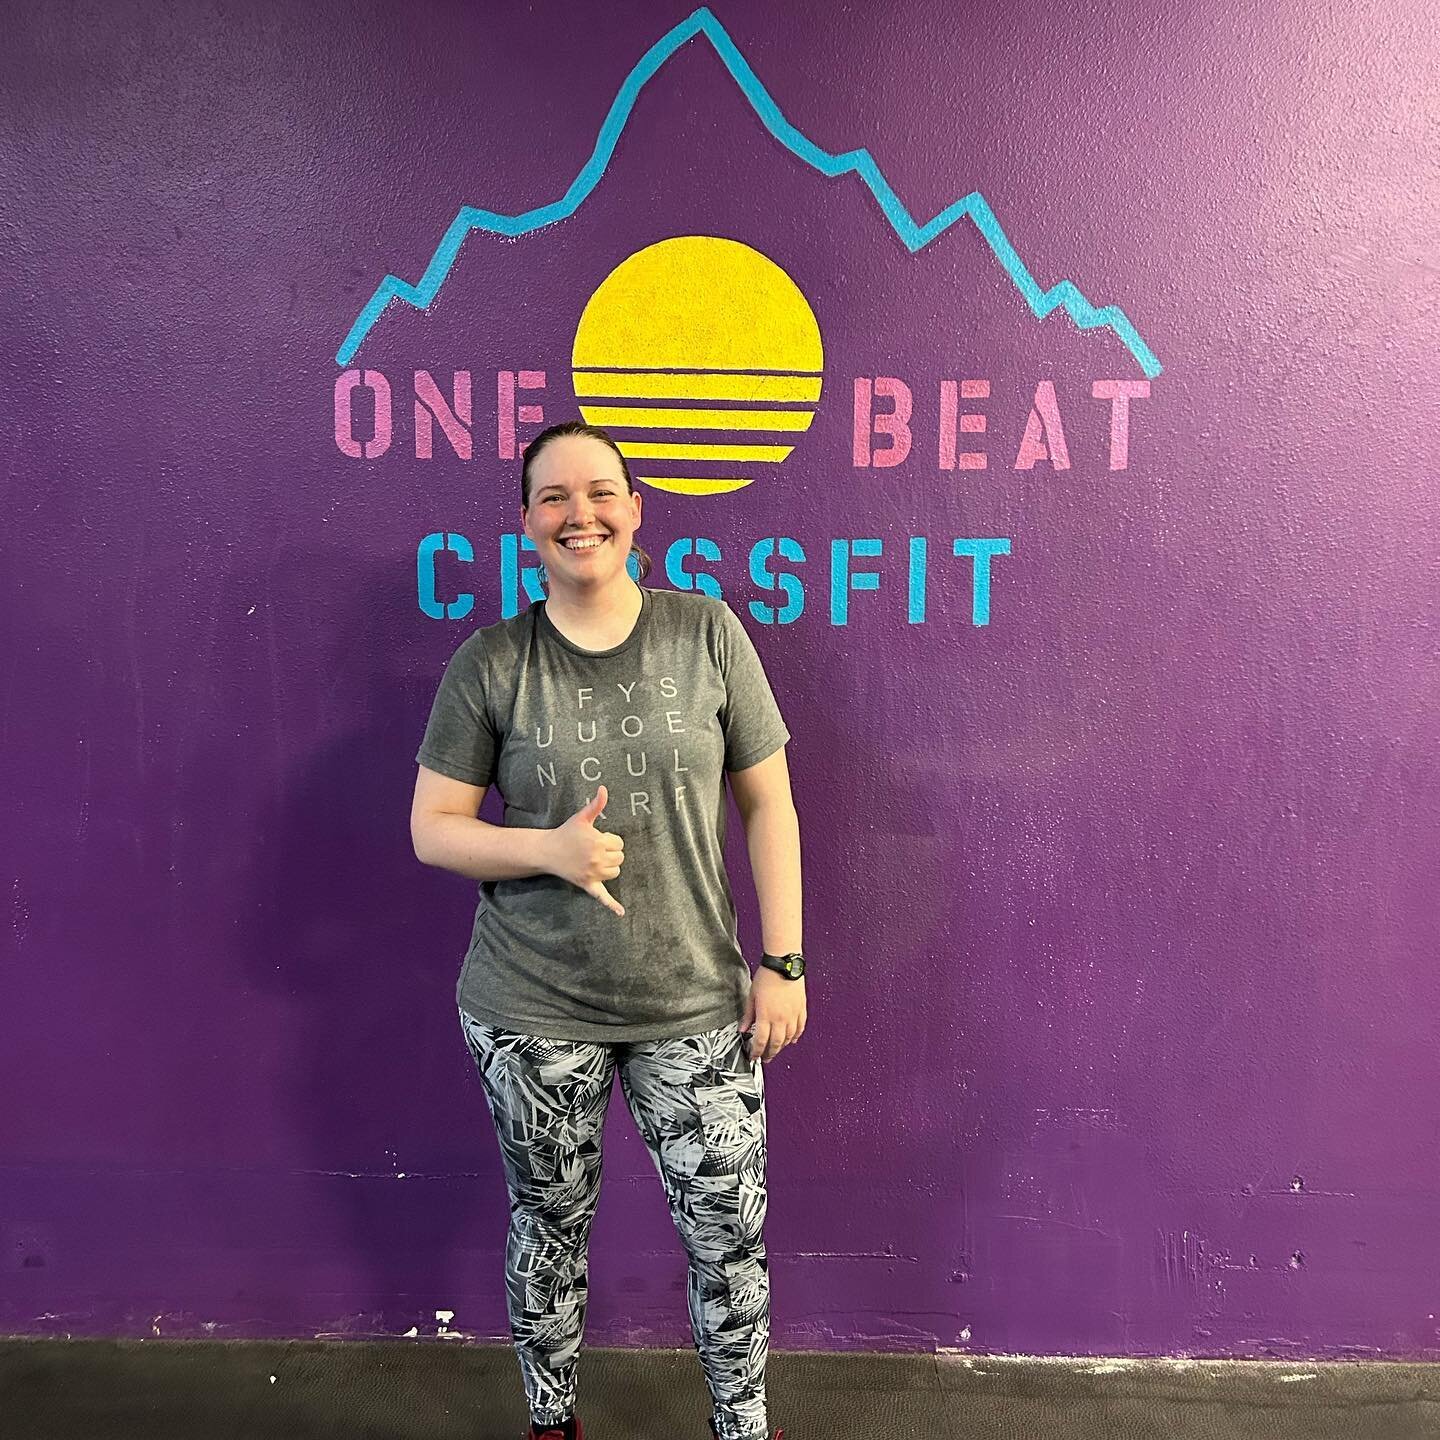 Please give a warm one Beat welcome to our newest member Amanda! We are so excited to have you join our community!! 🎉

#weareonebeat #onebeatcrossfit #onebeat #community #newmember #crossfit #crossfitgirls #fitnessismorefunwithfriends